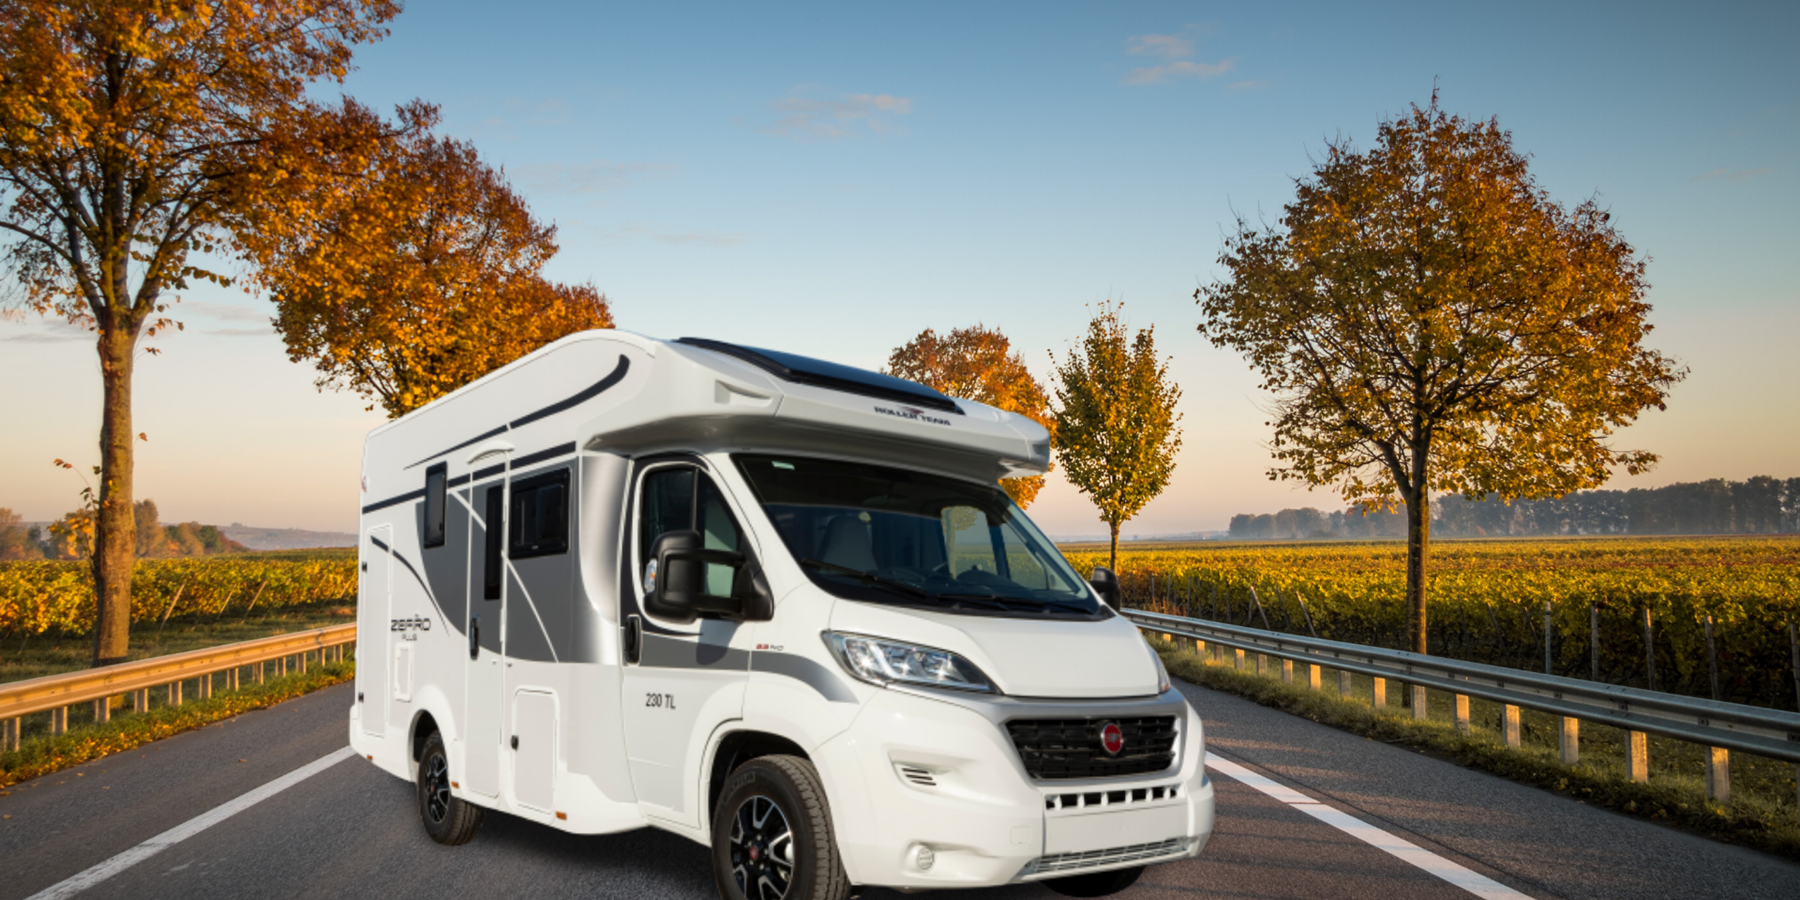 Zefiro 230 TL, the low-profile Roller Team motorhome with an out of the ordinary layout